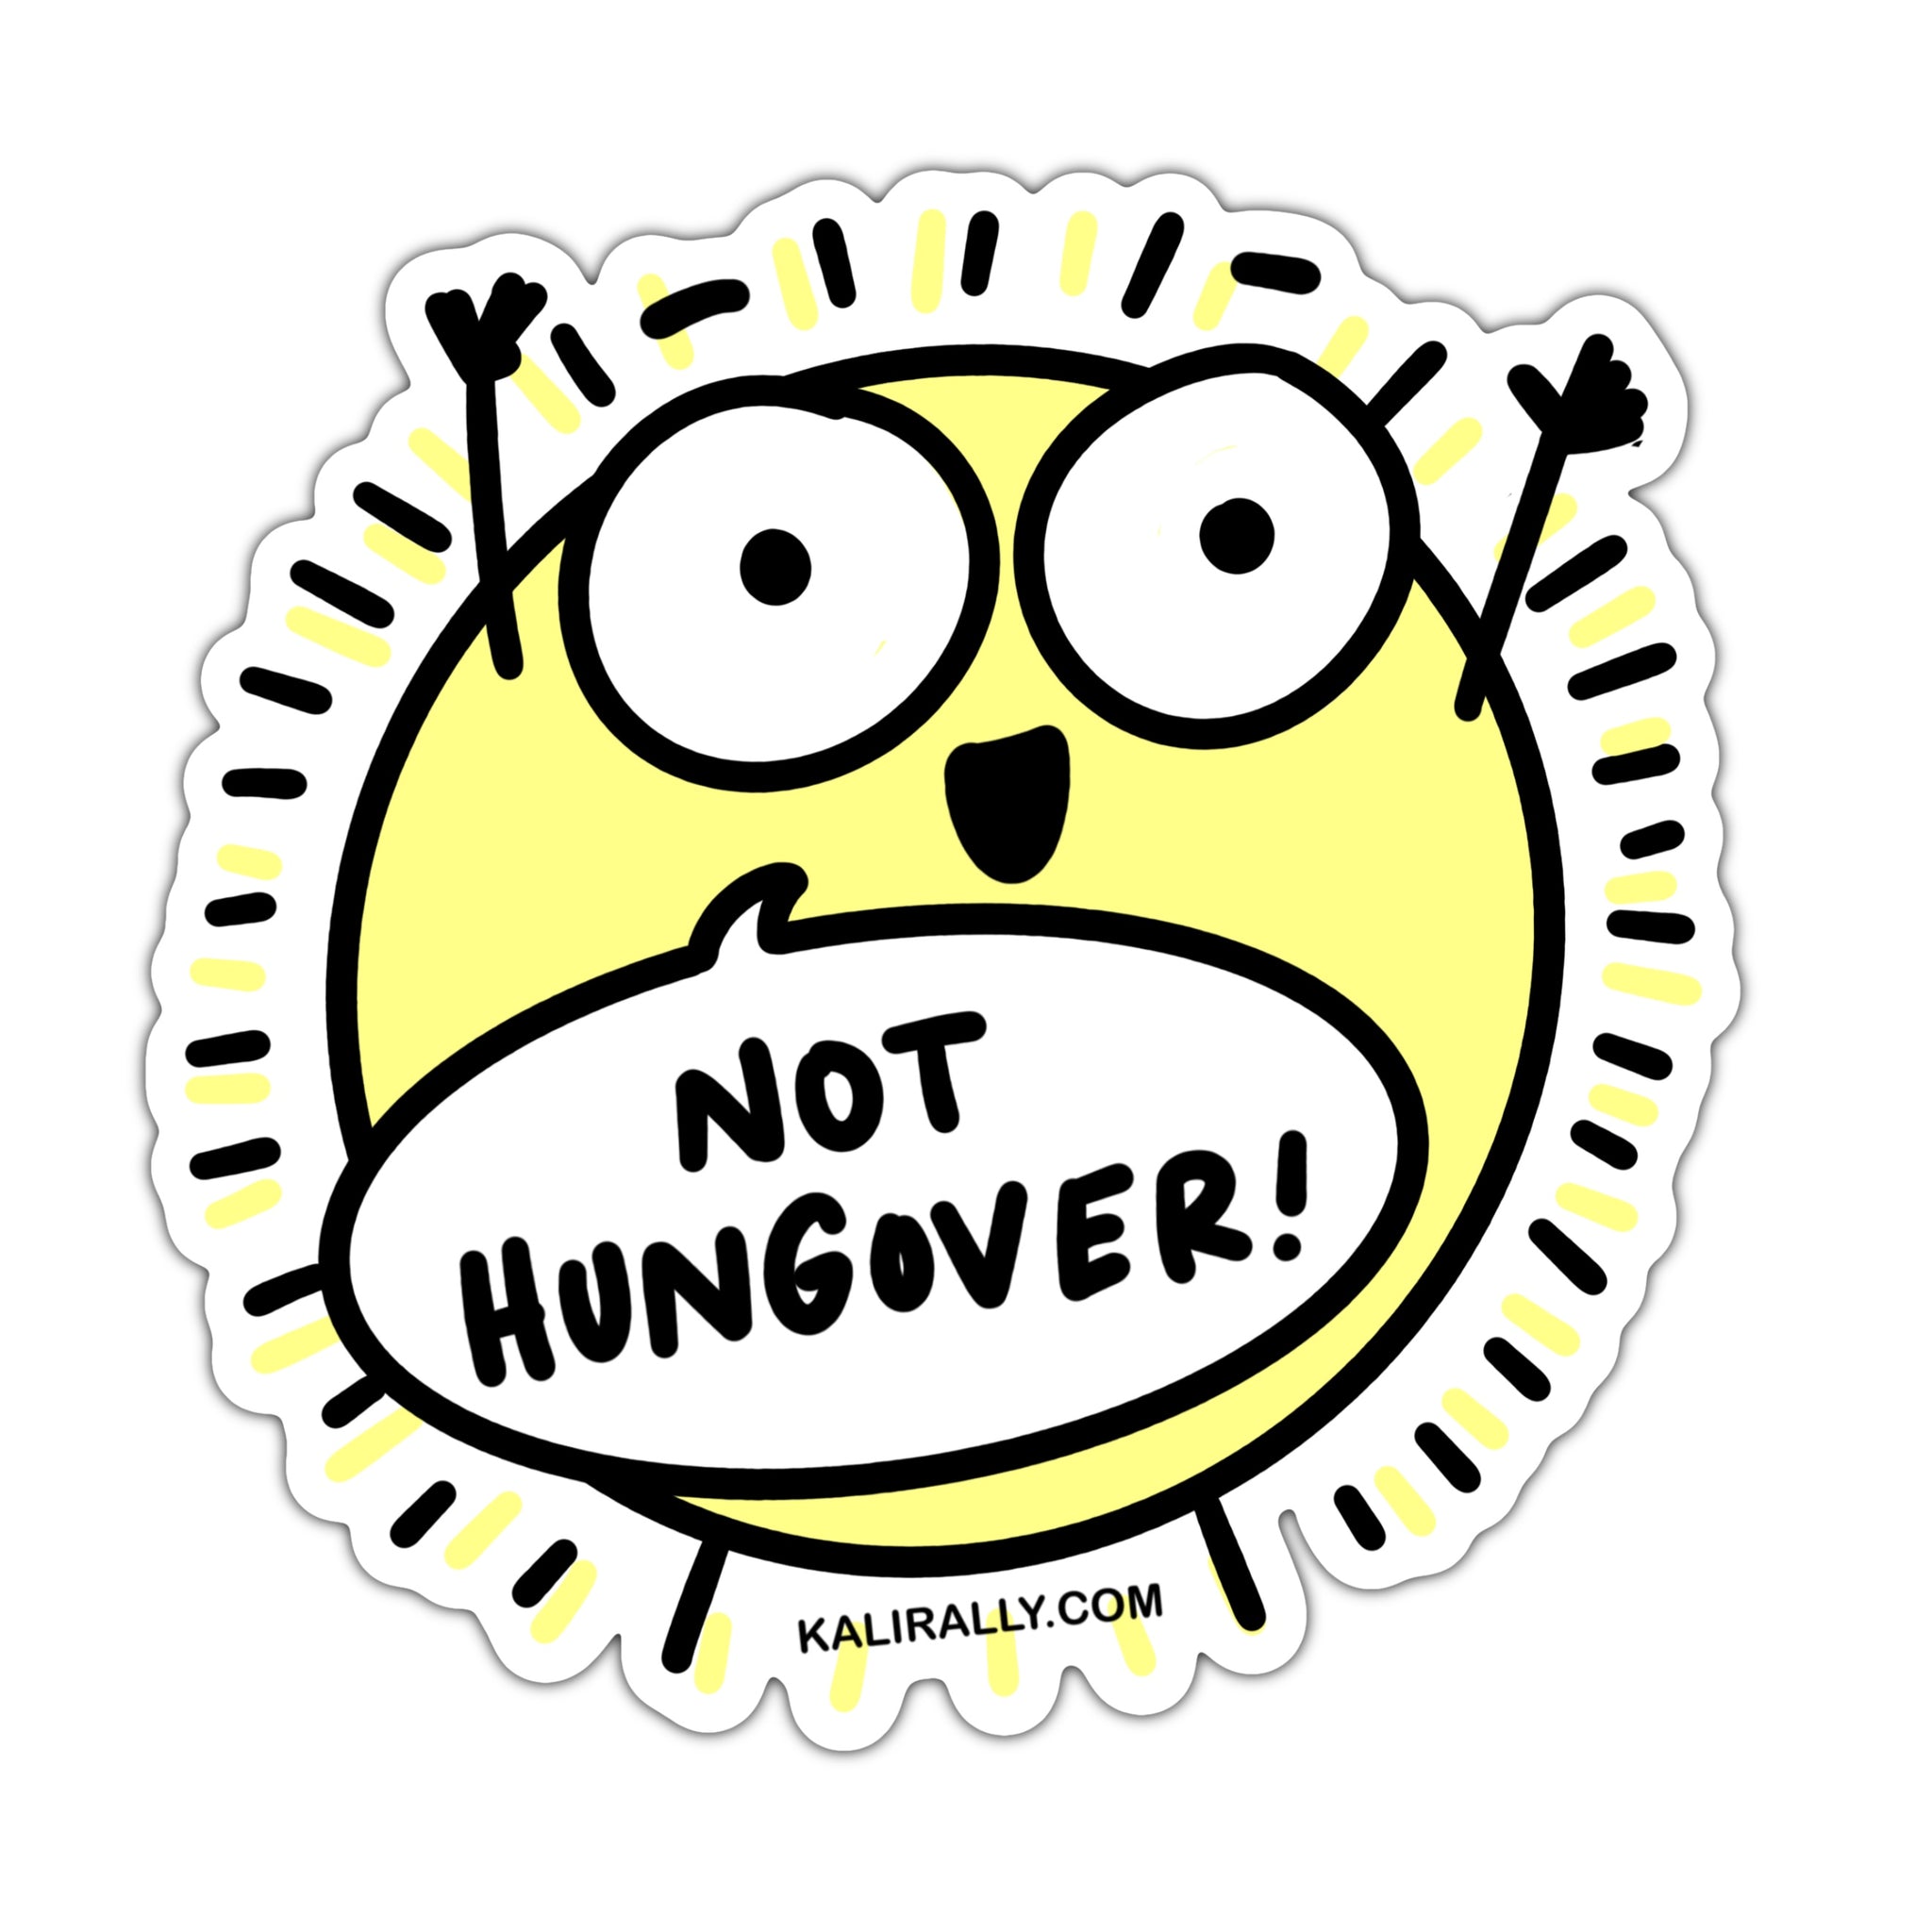 Not Hungover!, Funny sobriety sticker, AA support sticker, waterproof vinyl sticker